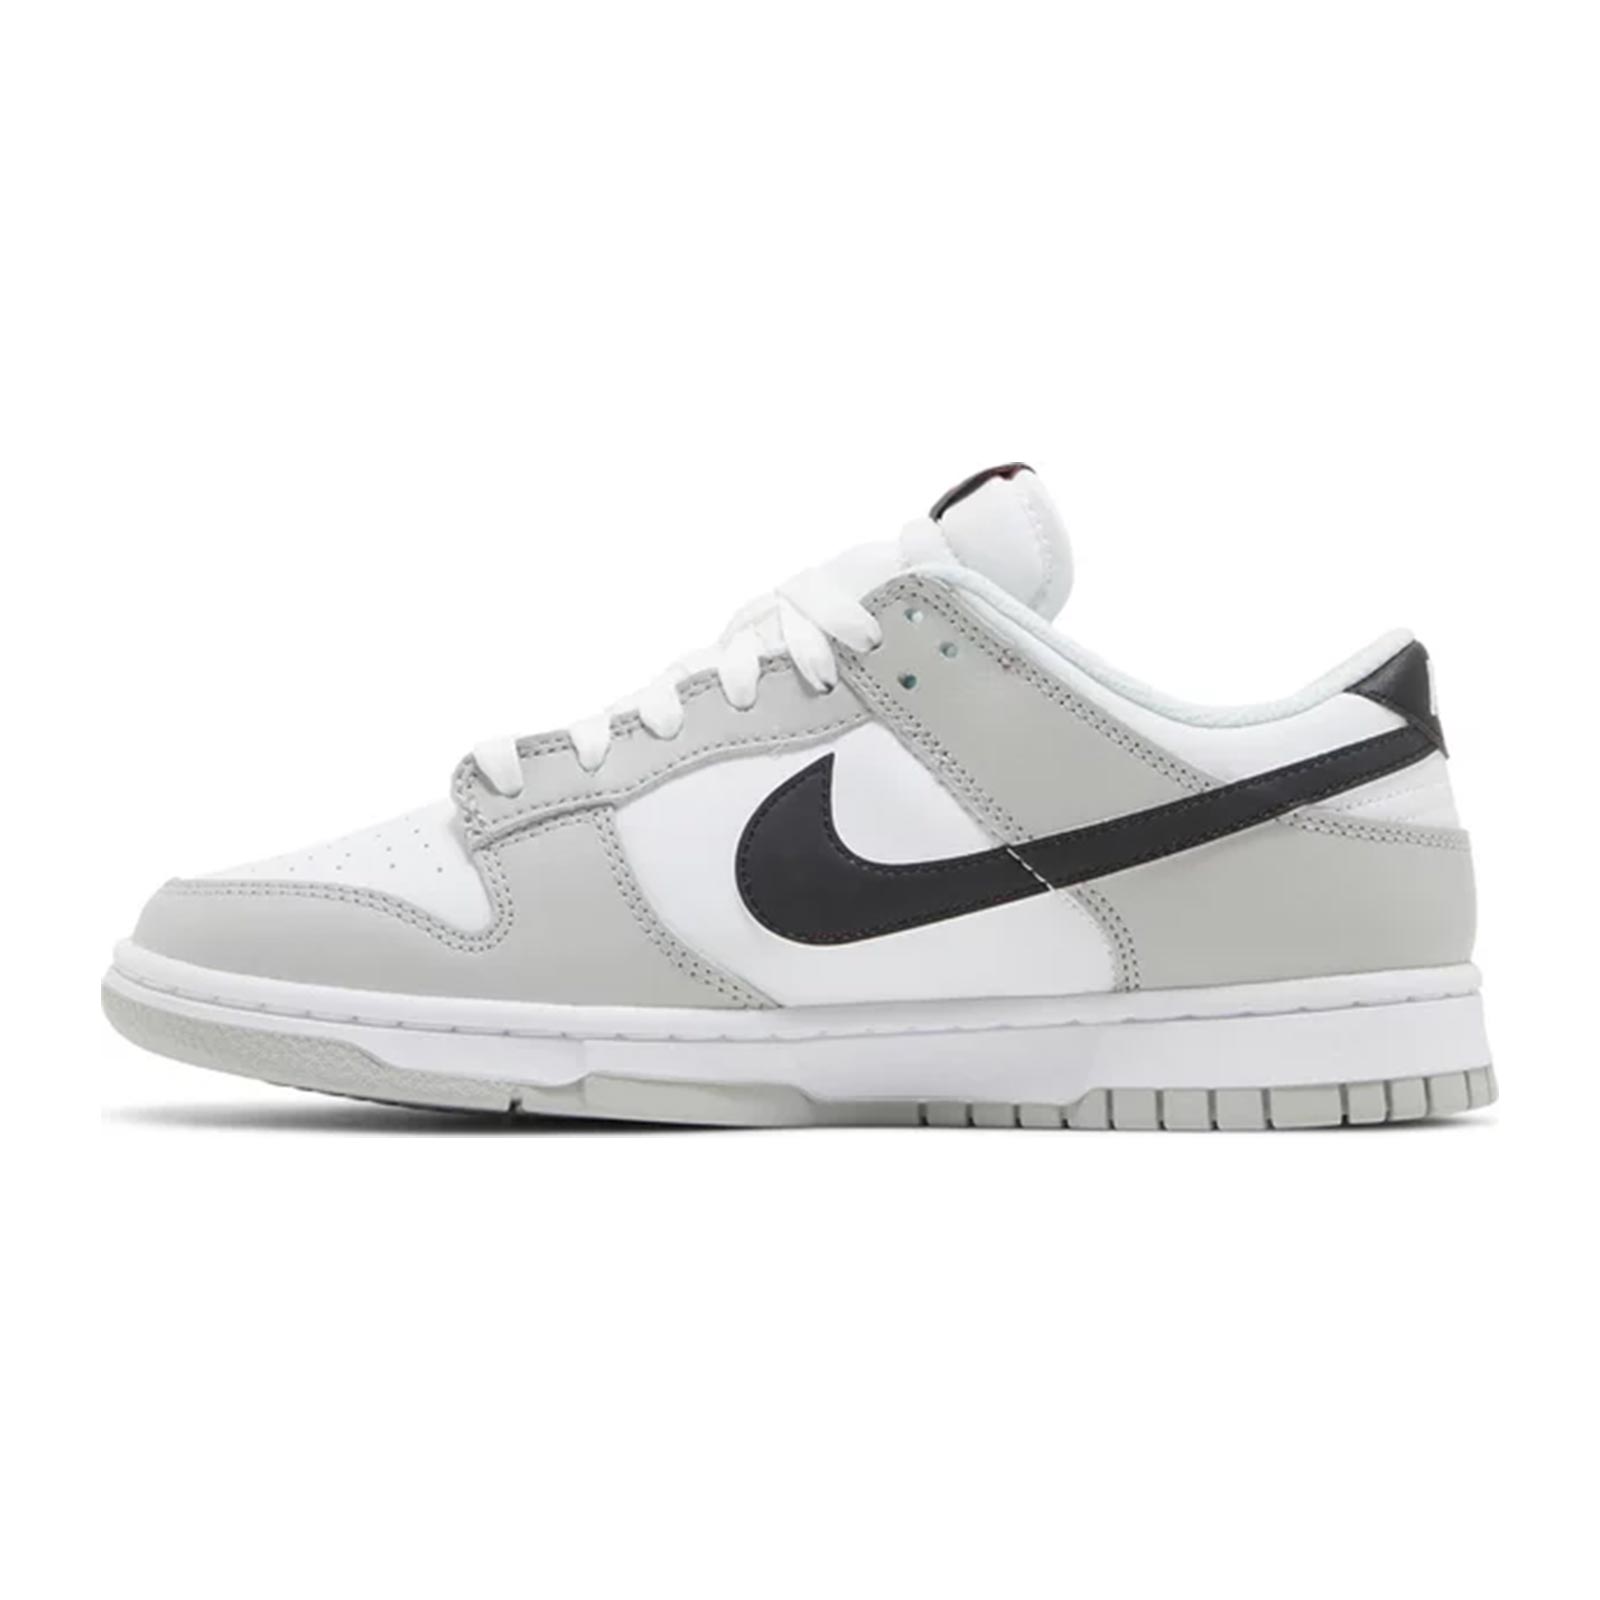 Nike Dunk Low, SE Lottery Pack - Grey Fog